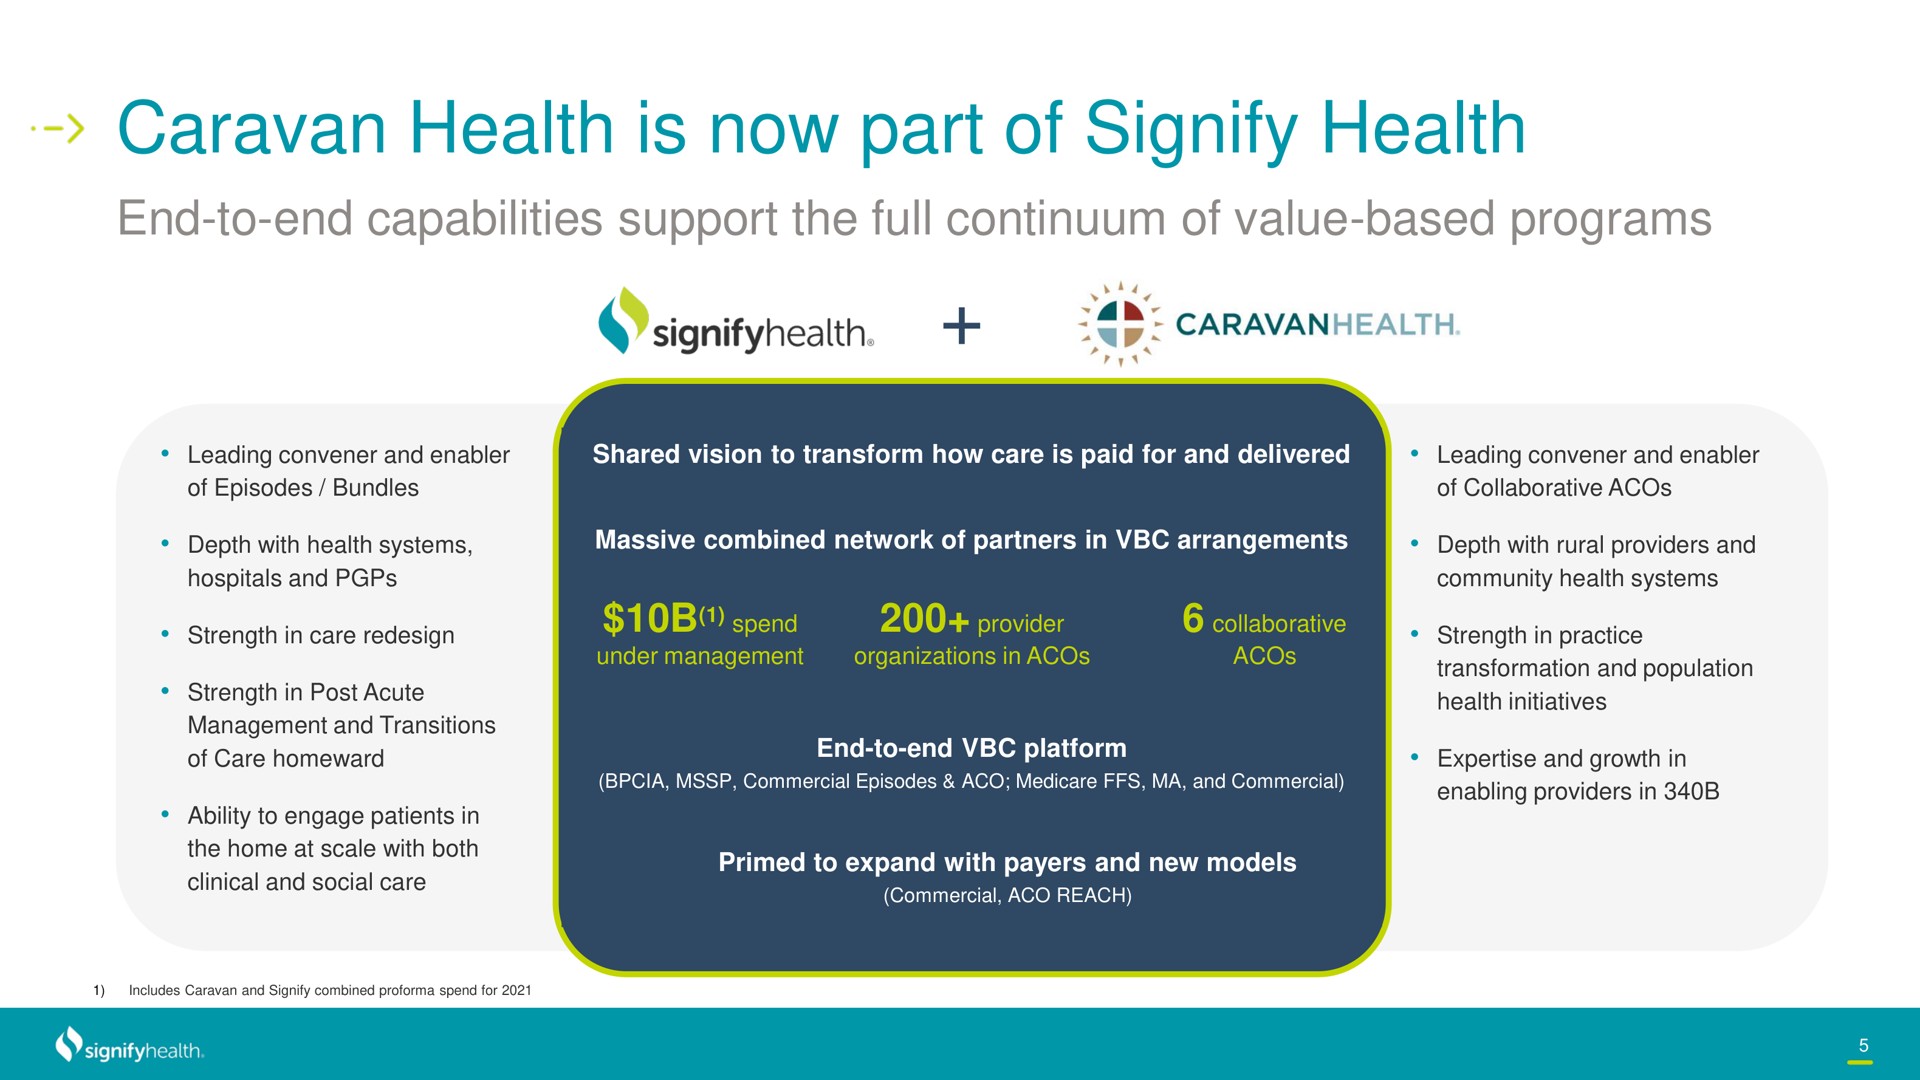 caravan health is now part of signify health | Signify Health